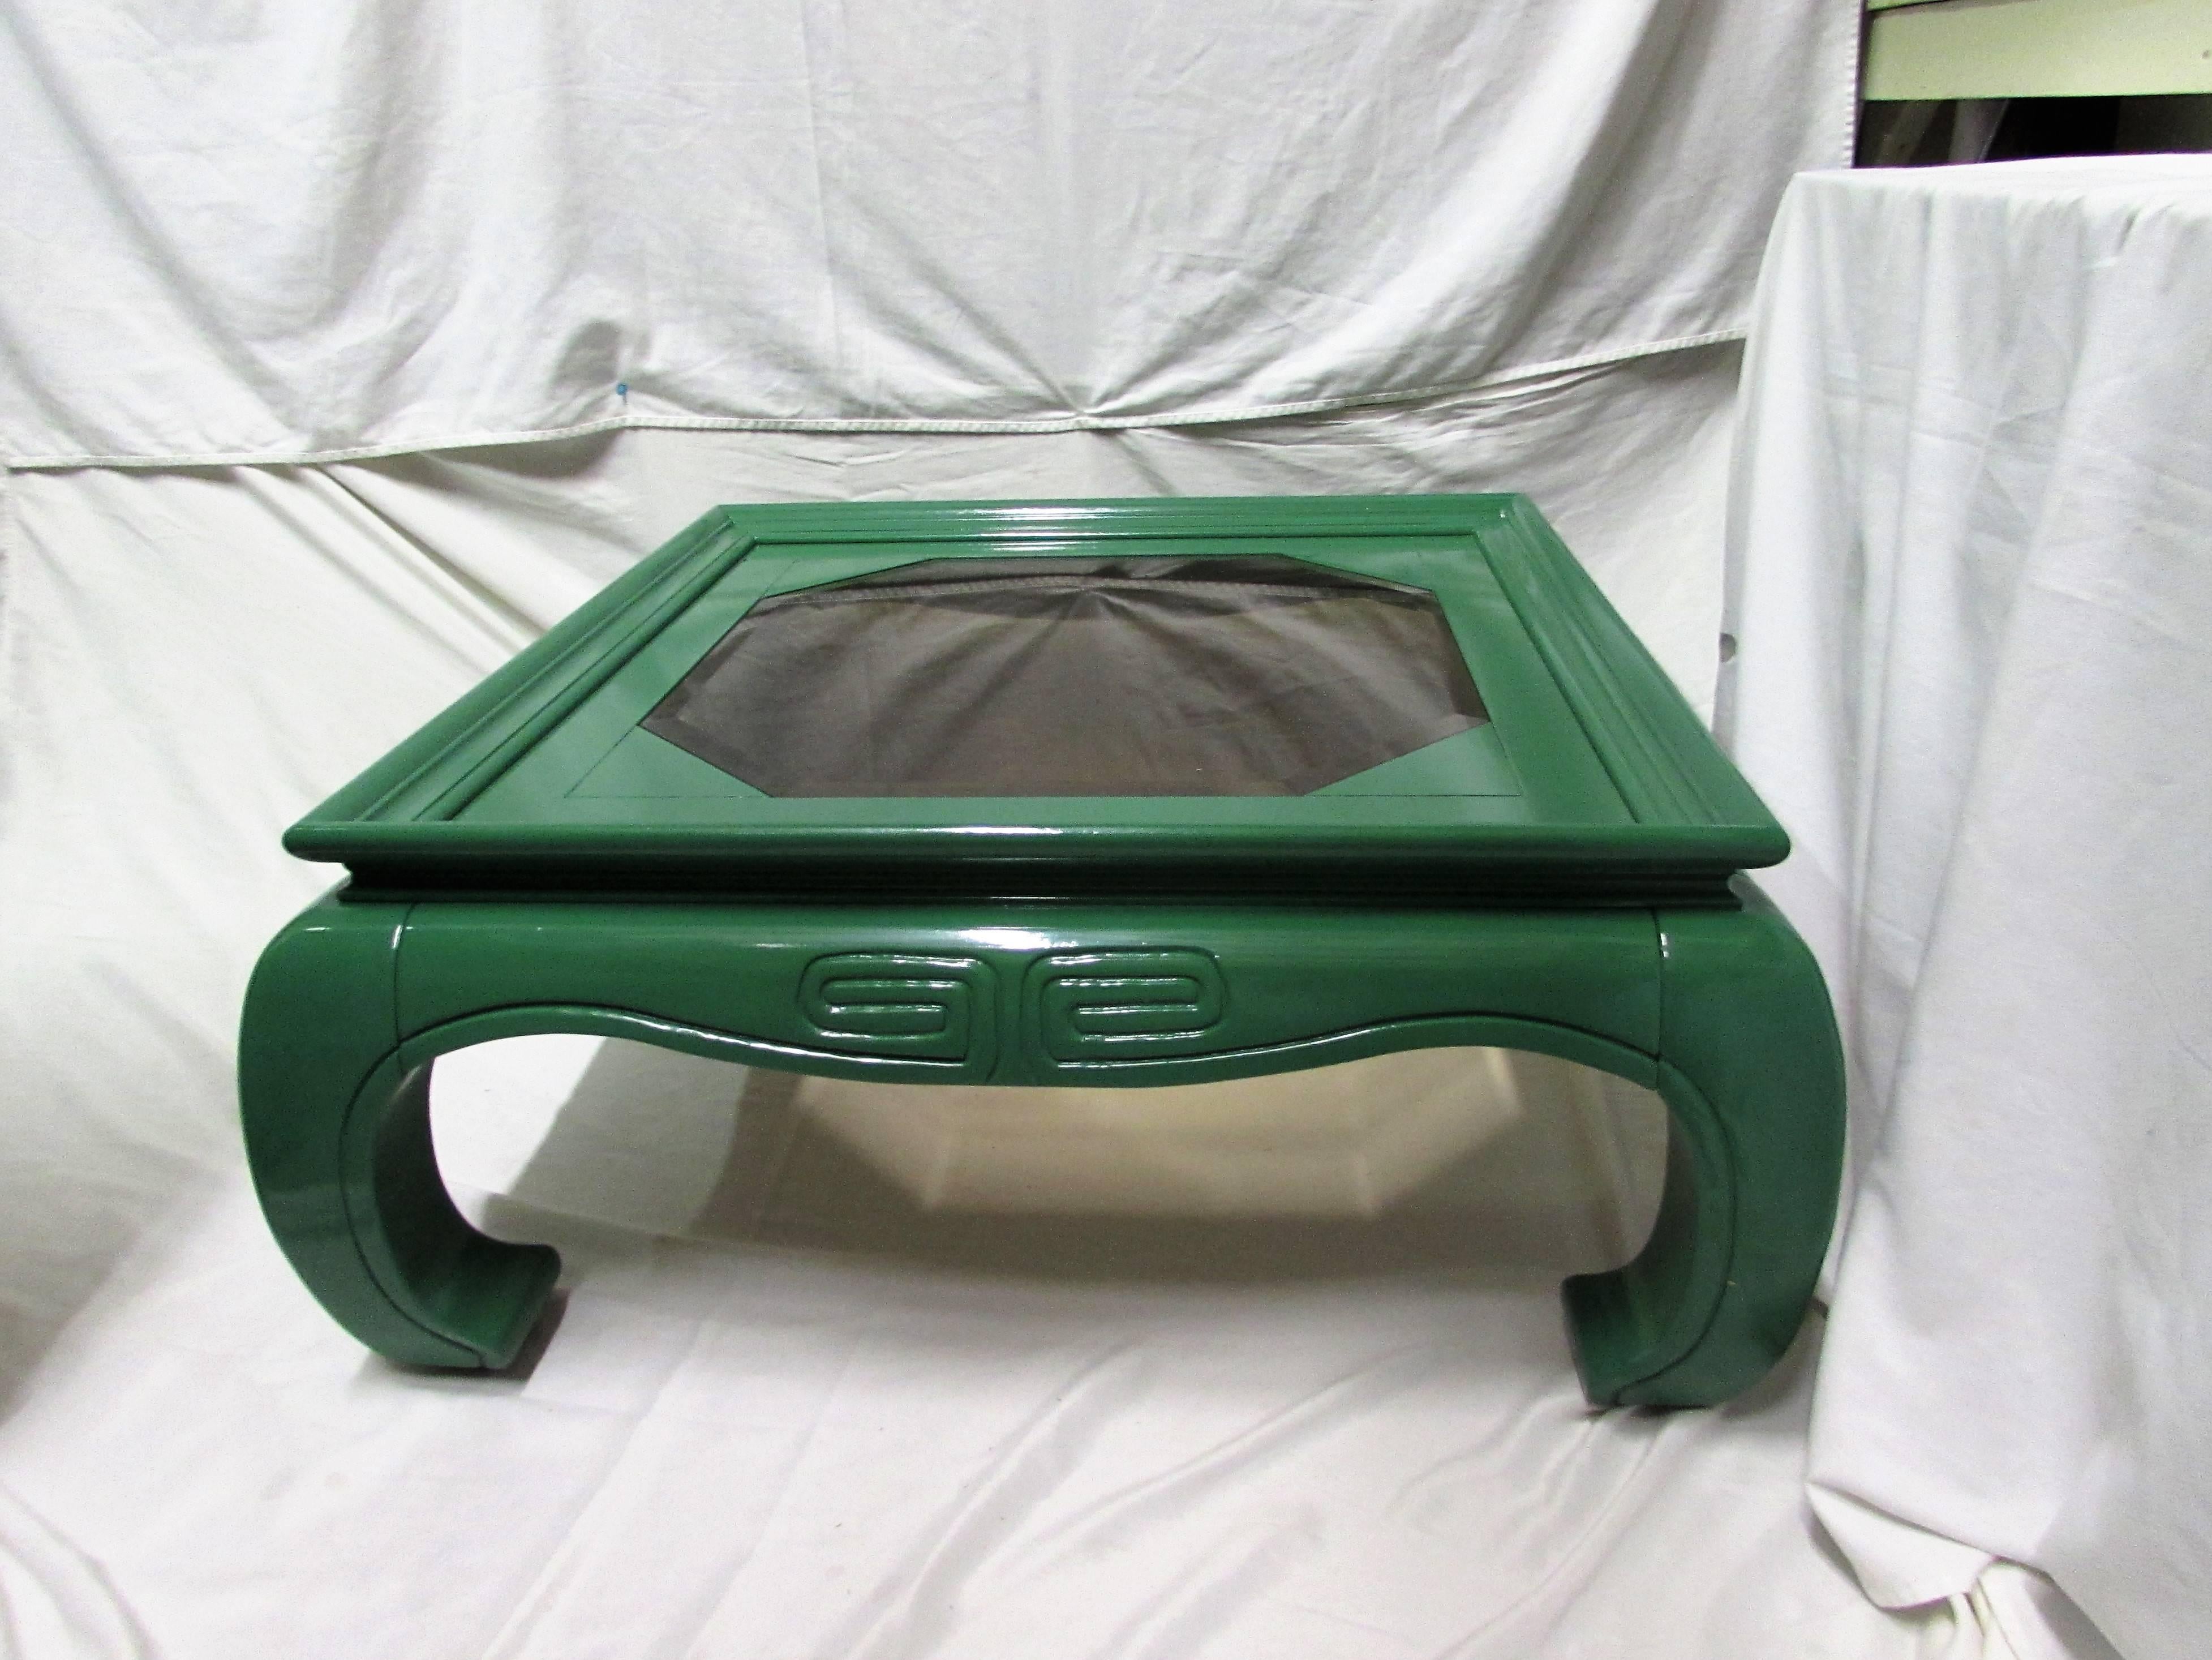 Greek Key motif coffee table with Ming-style legs and smoked glass on top. Newly lacquered in a high-gloss green finish.